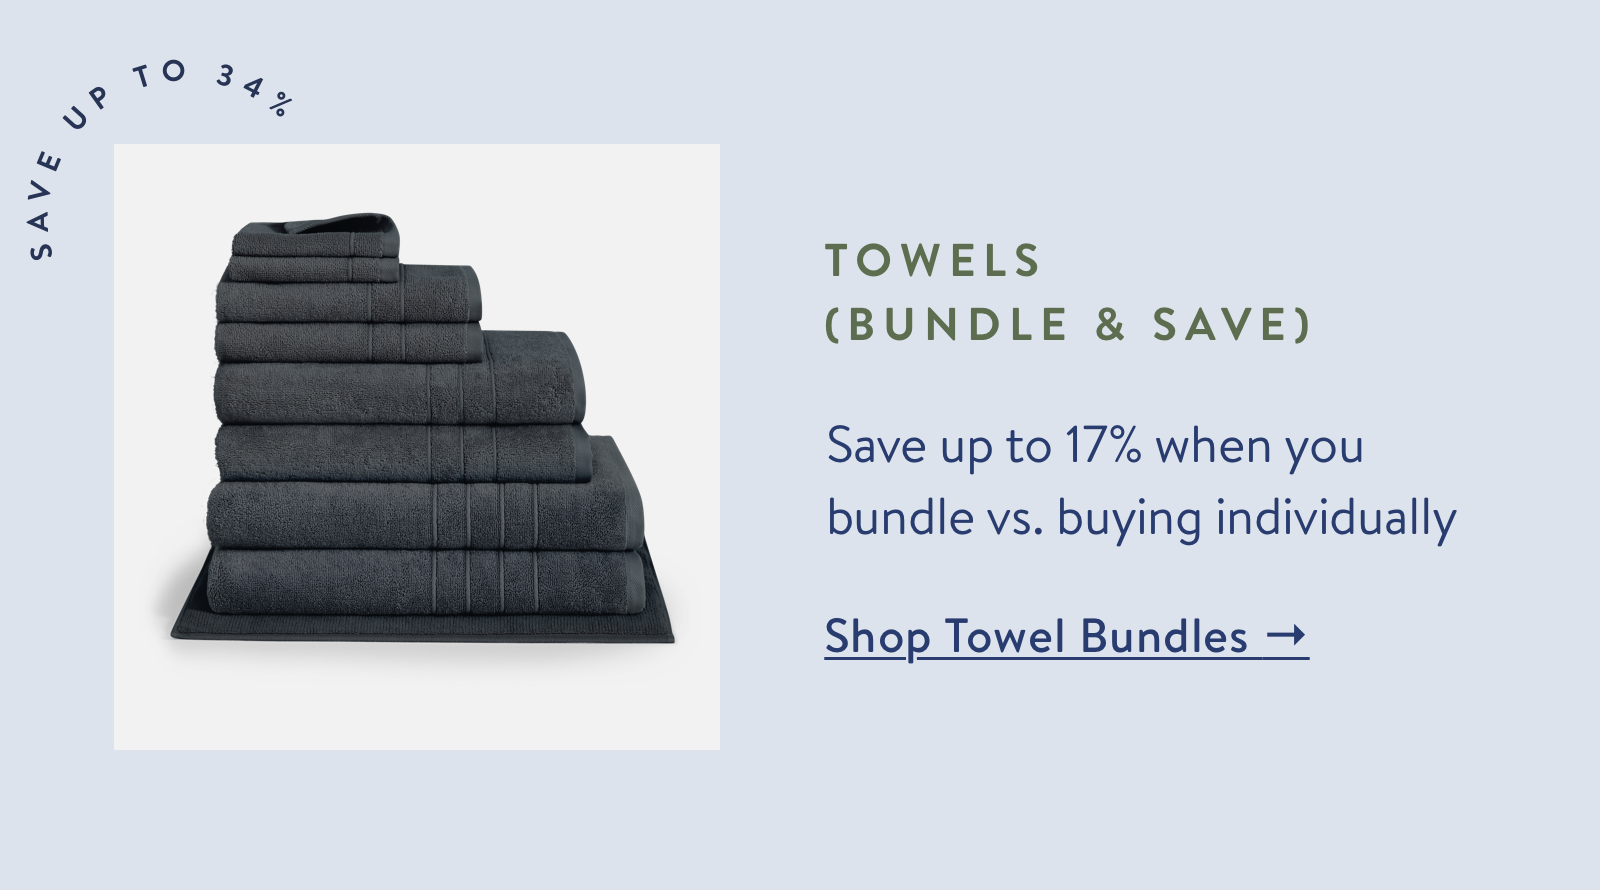 Towels - Save up to 17% when you bundle vs. buying individually.